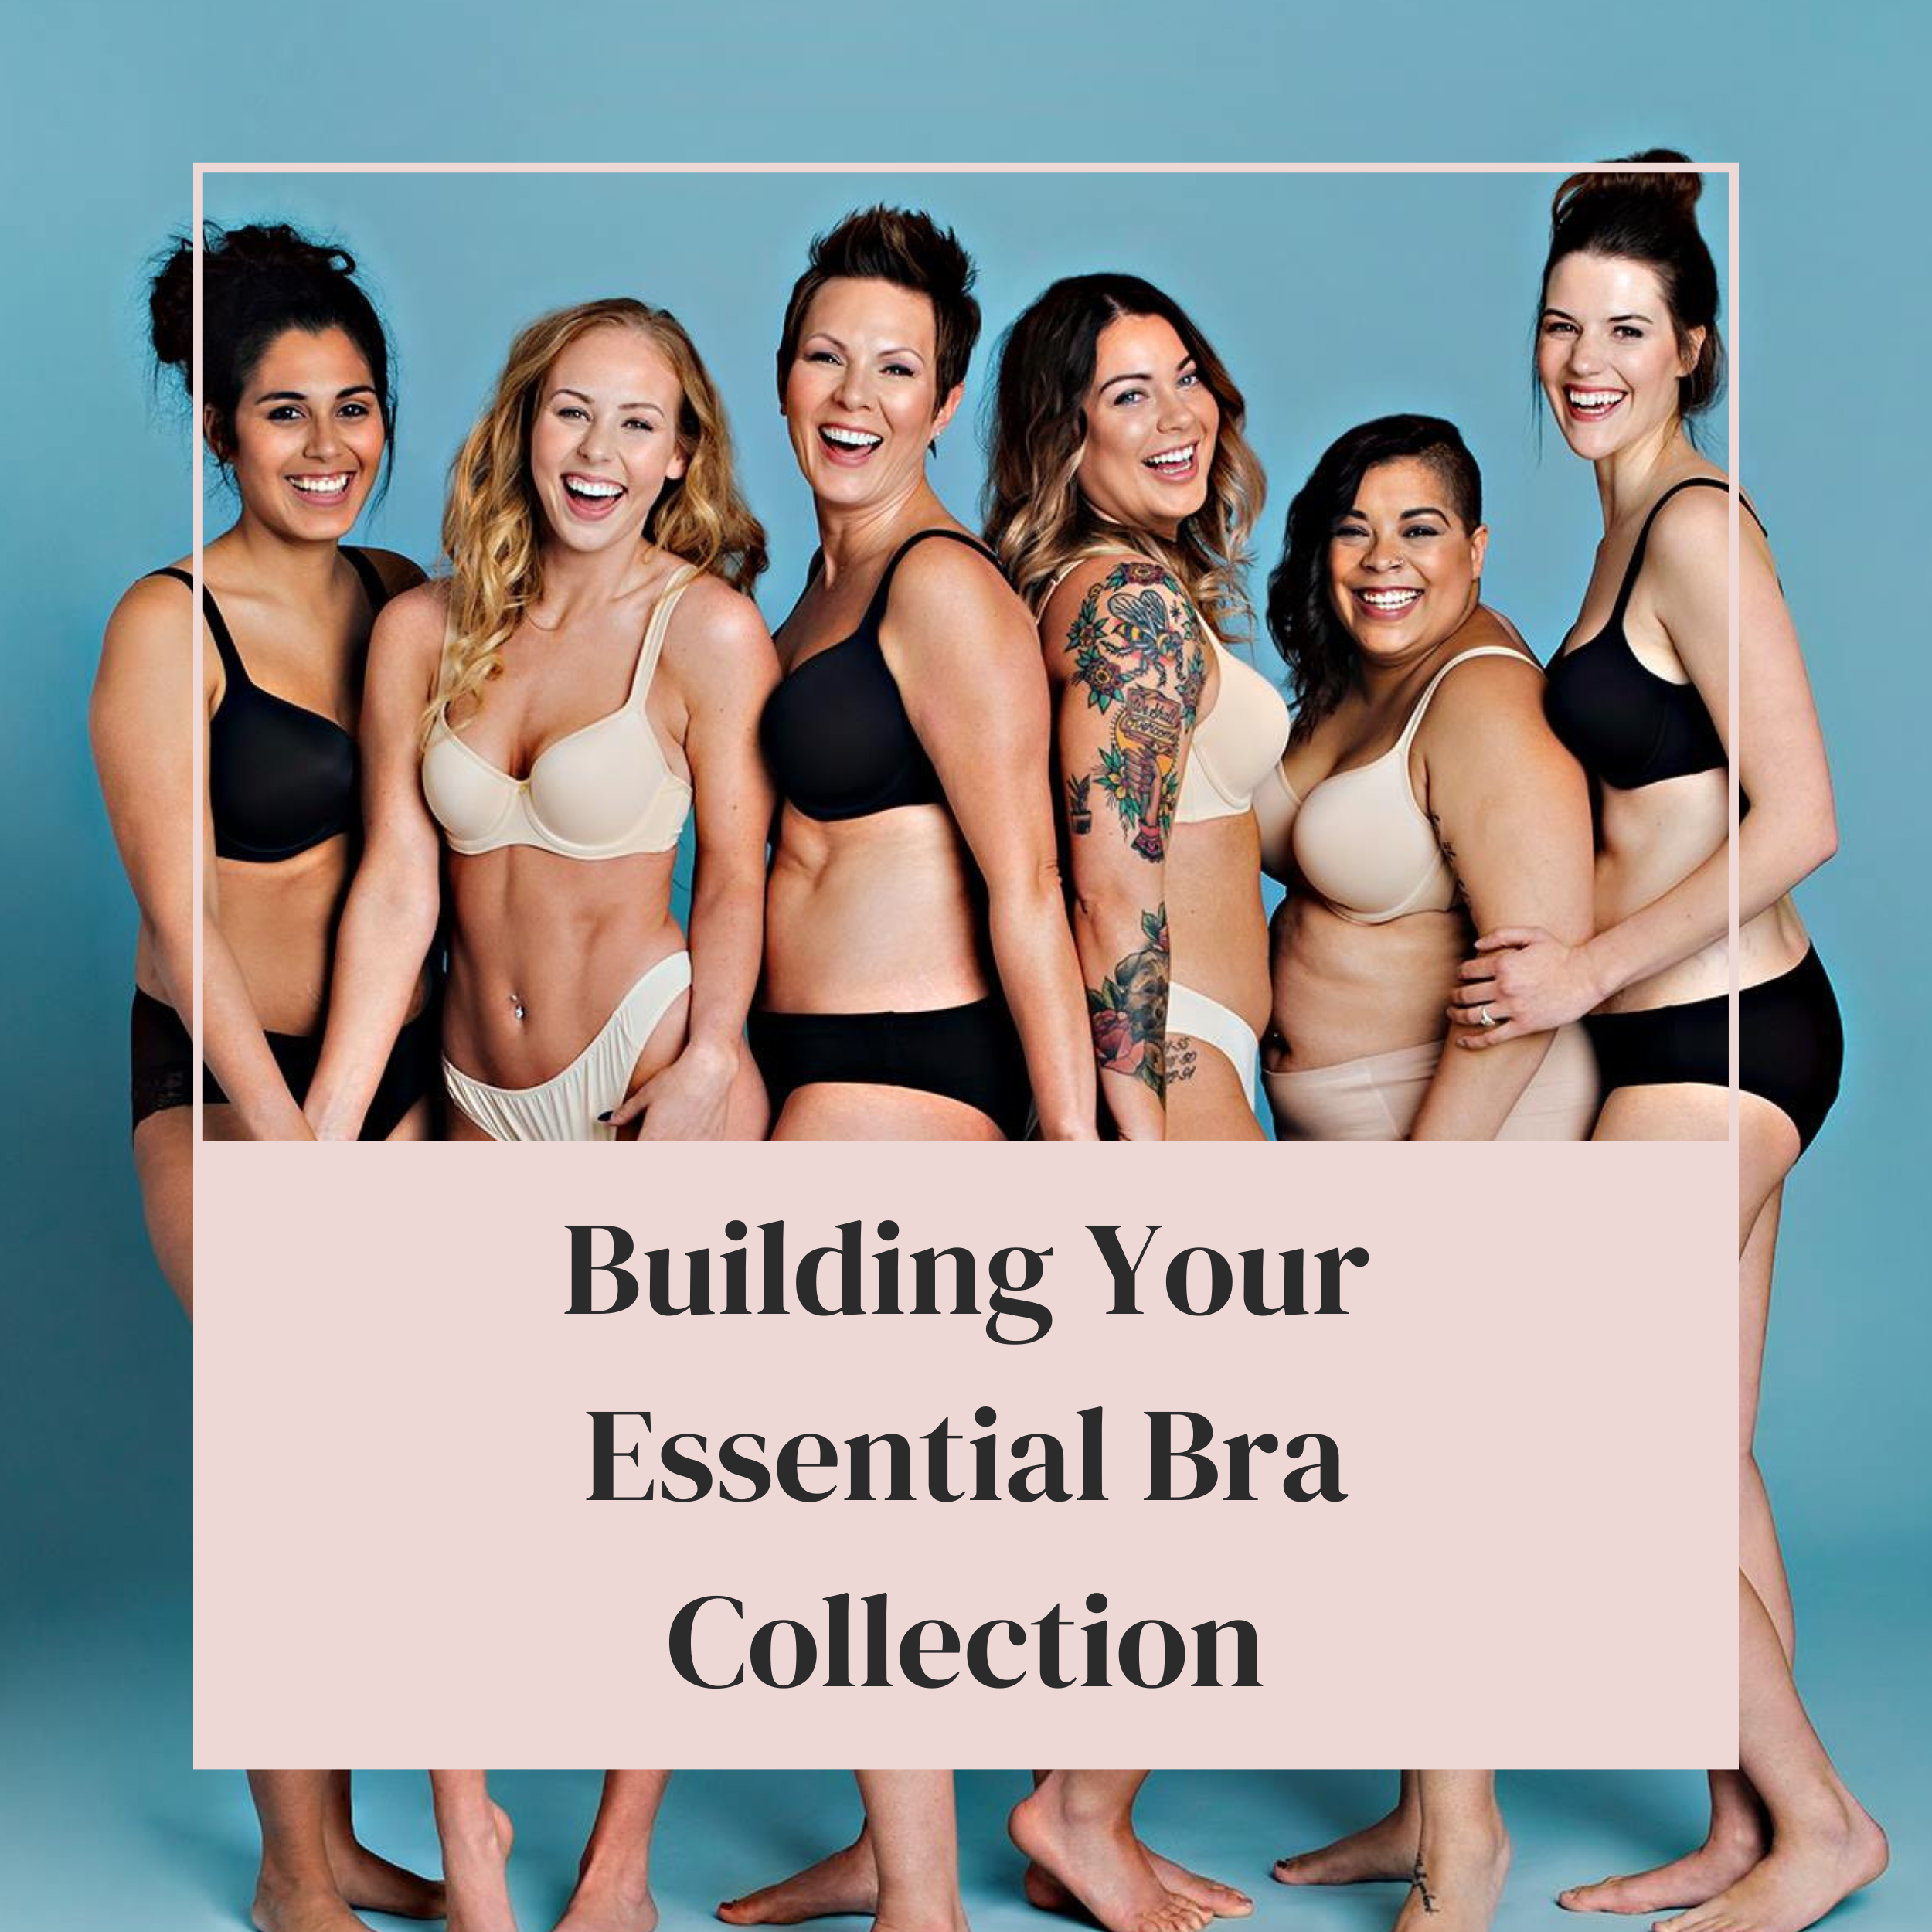 Building Your Essential Bra Collection